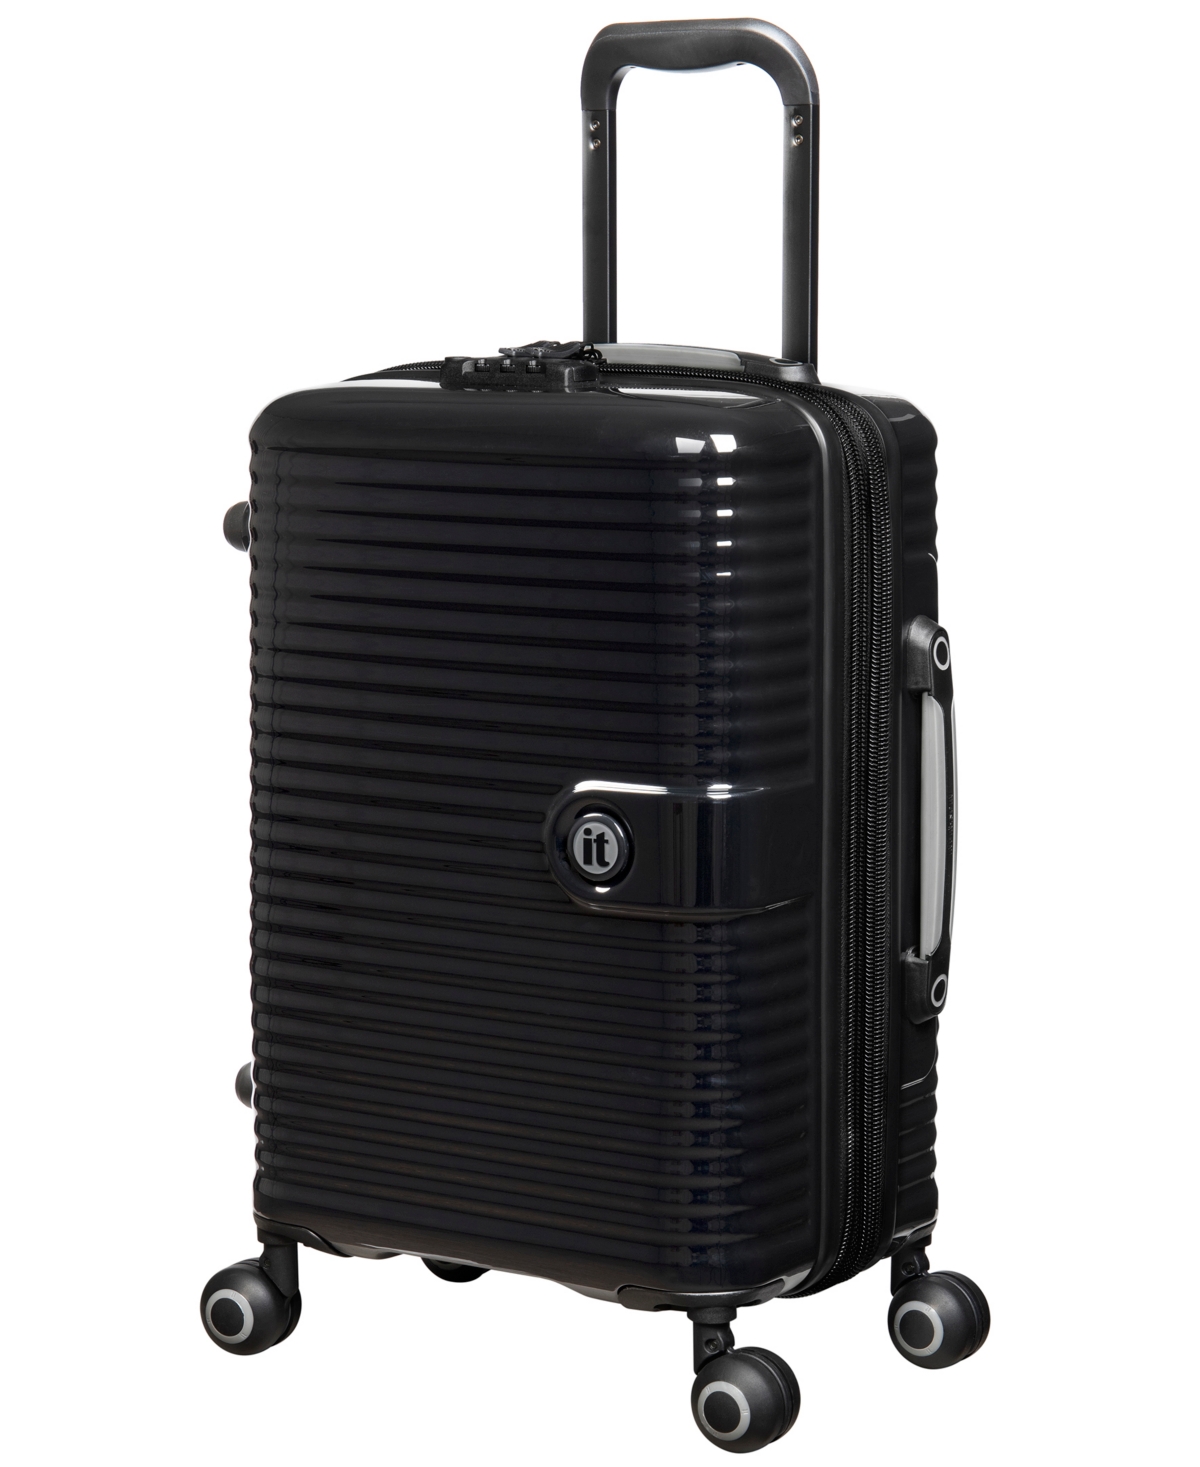 IT LUGGAGE HELIXIAN 19" HARDSIDE CARRY-ON 8-WHEEL EXPANDABLE SPINNER